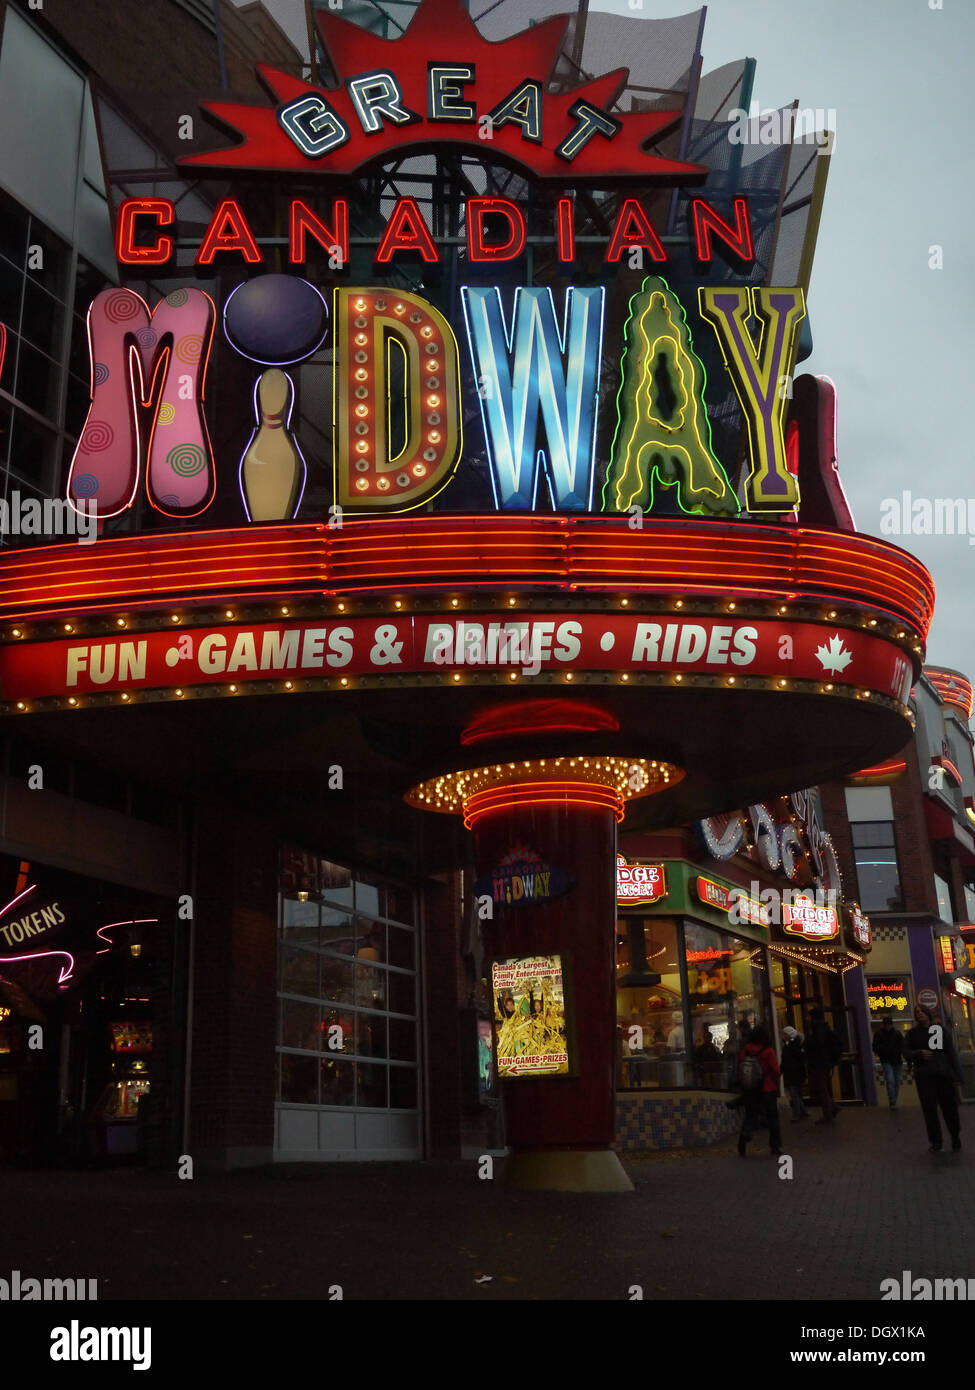 Clifton Hill Great Canadian Midway entertainment complex Banque D'Images